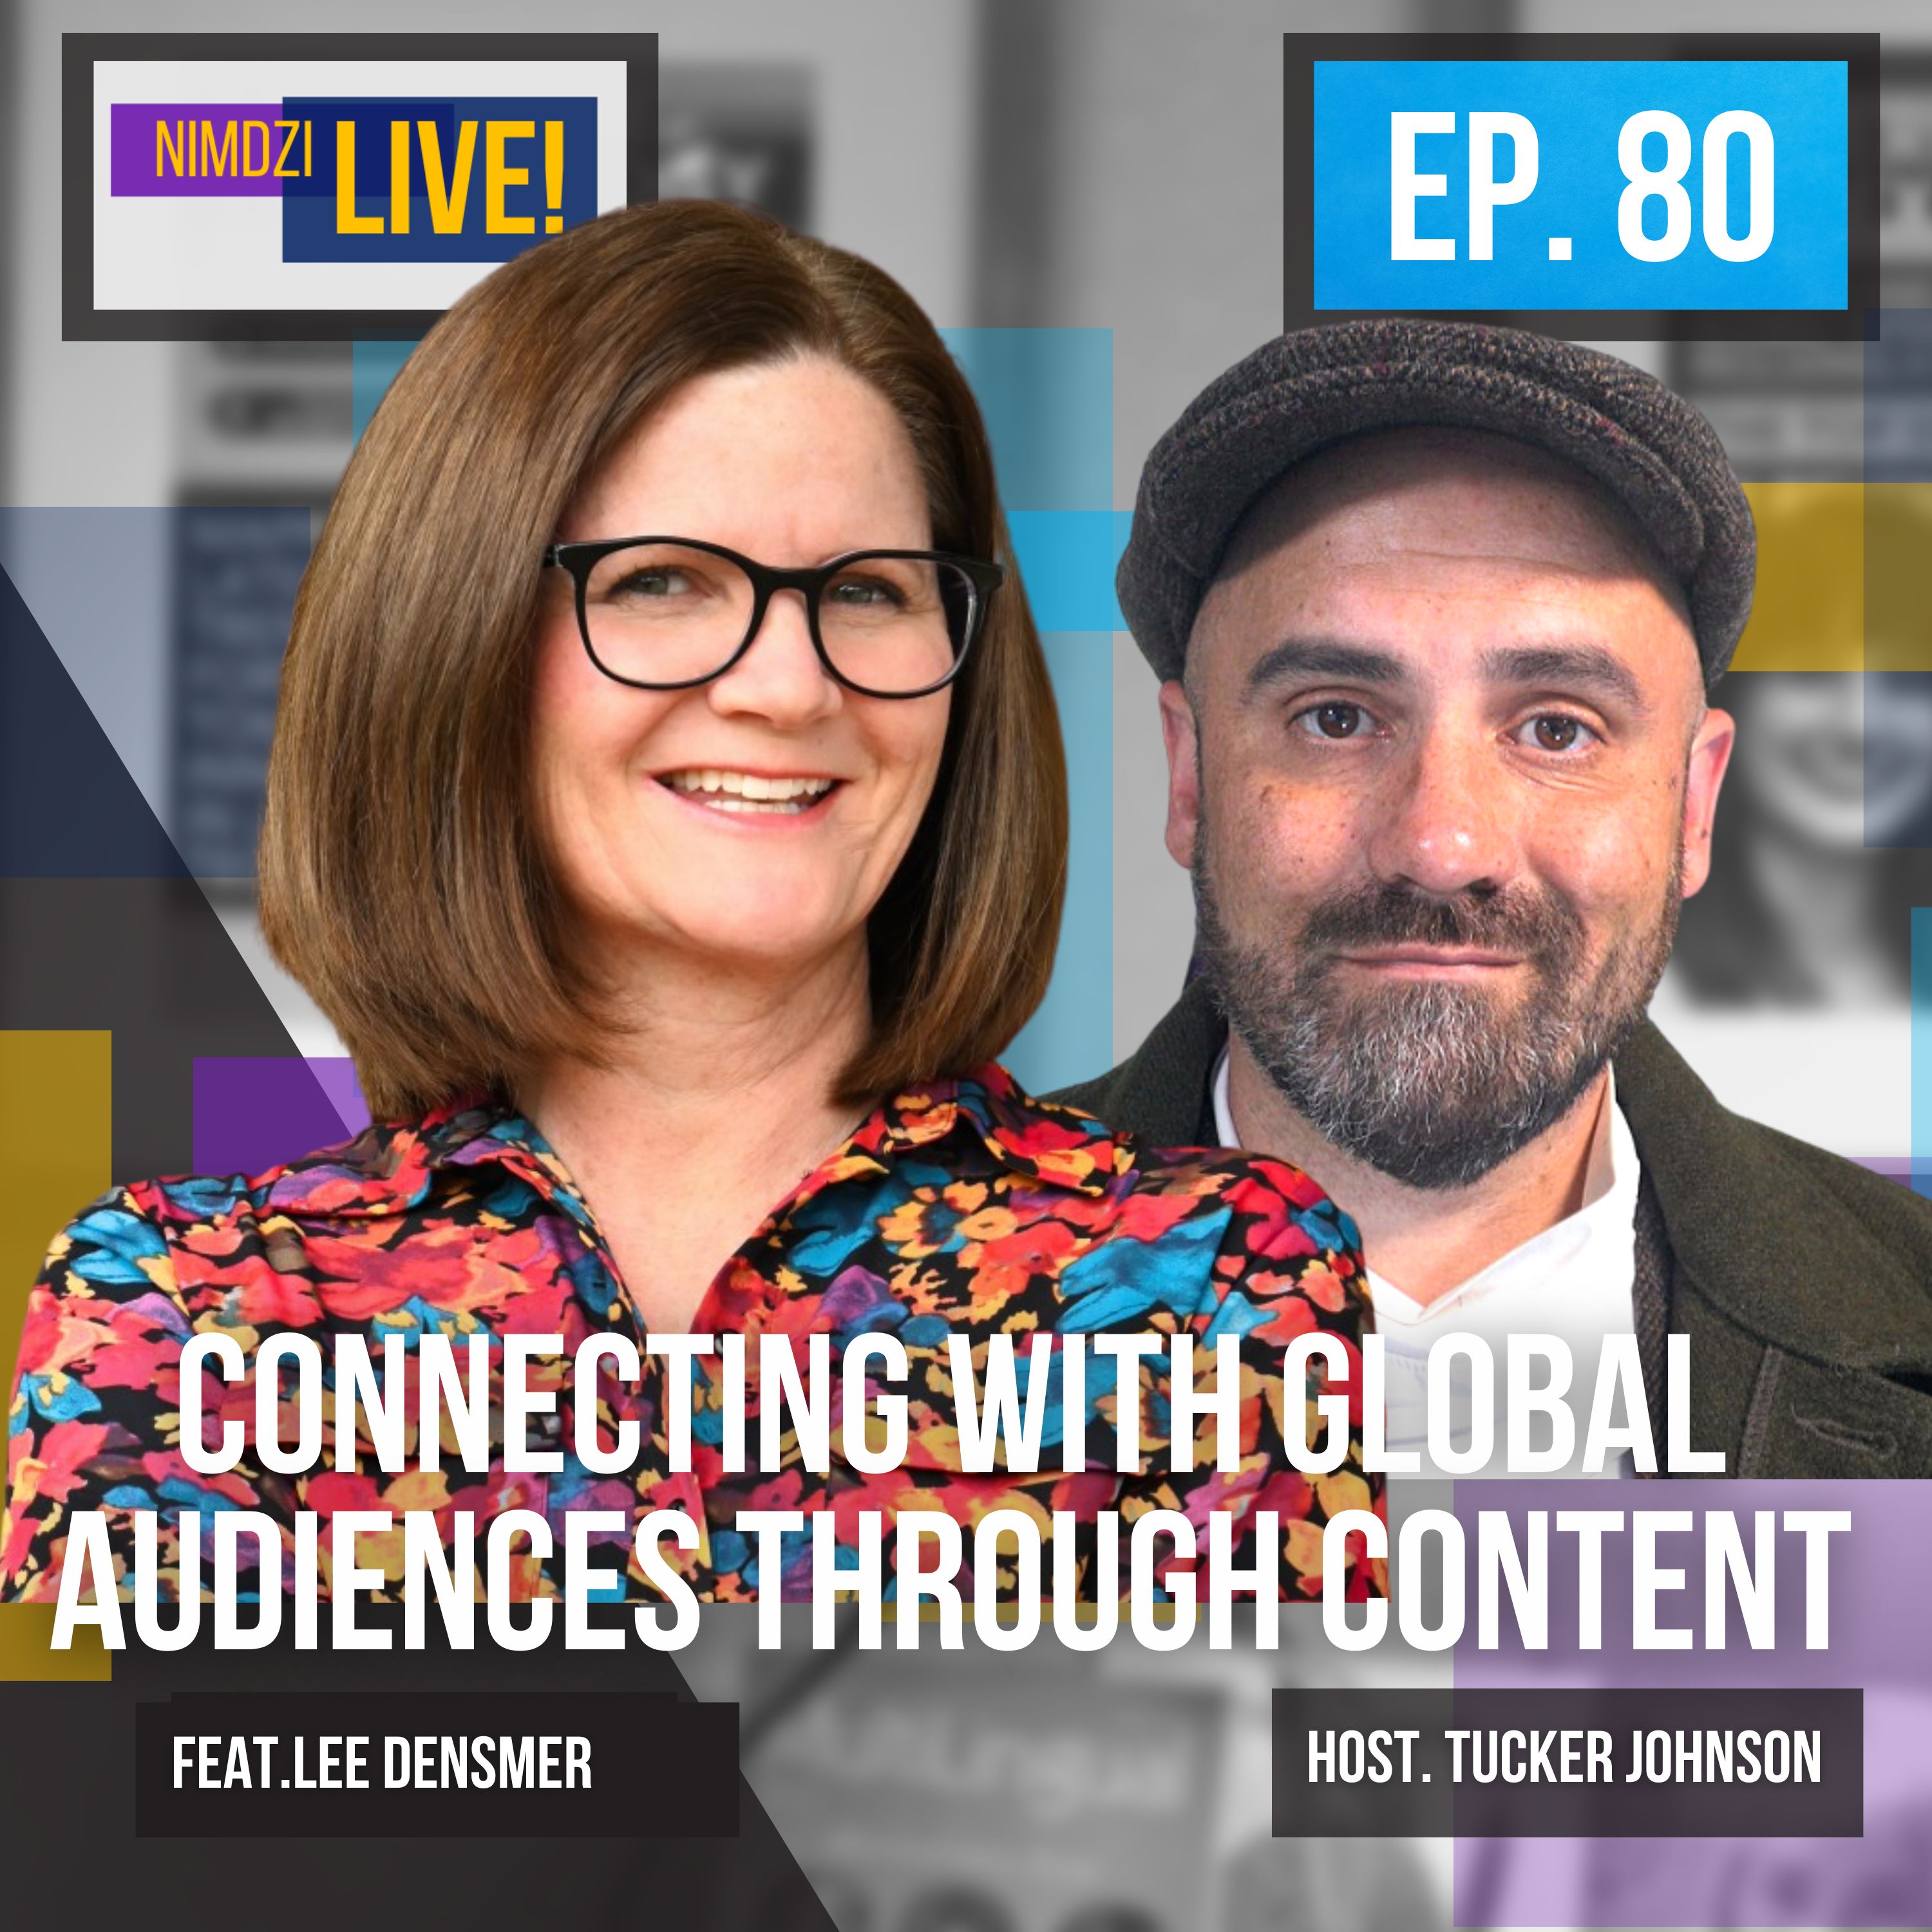 Connecting with global audiences through content feat. Lee Densmer